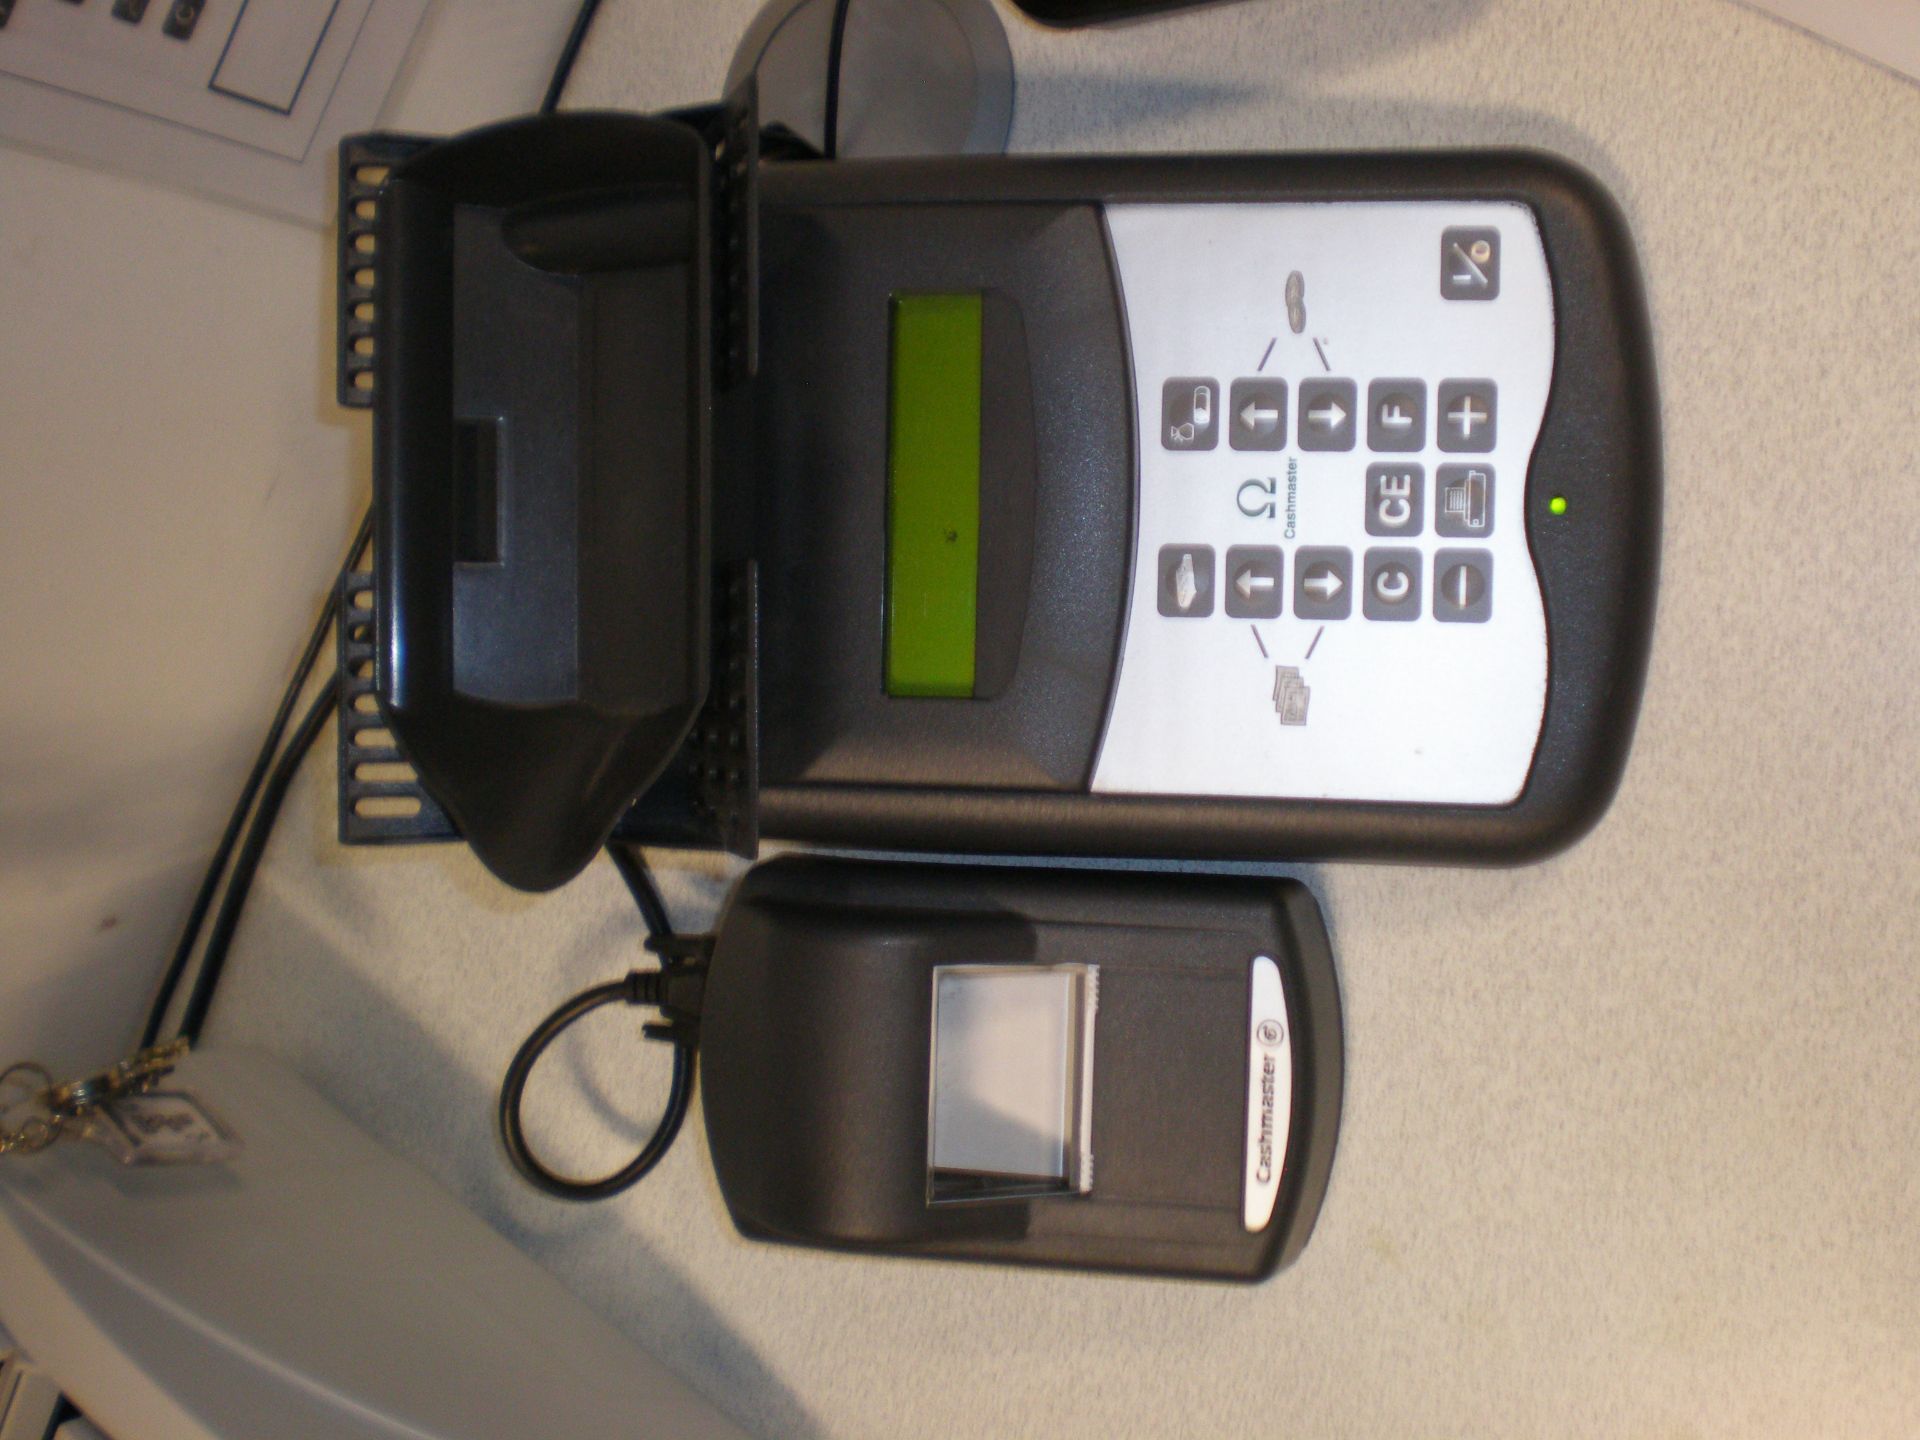 Cash Master Cash Counting Machine With Printer Counts Coins And Notes, Adds Up Running Total, - Image 2 of 3